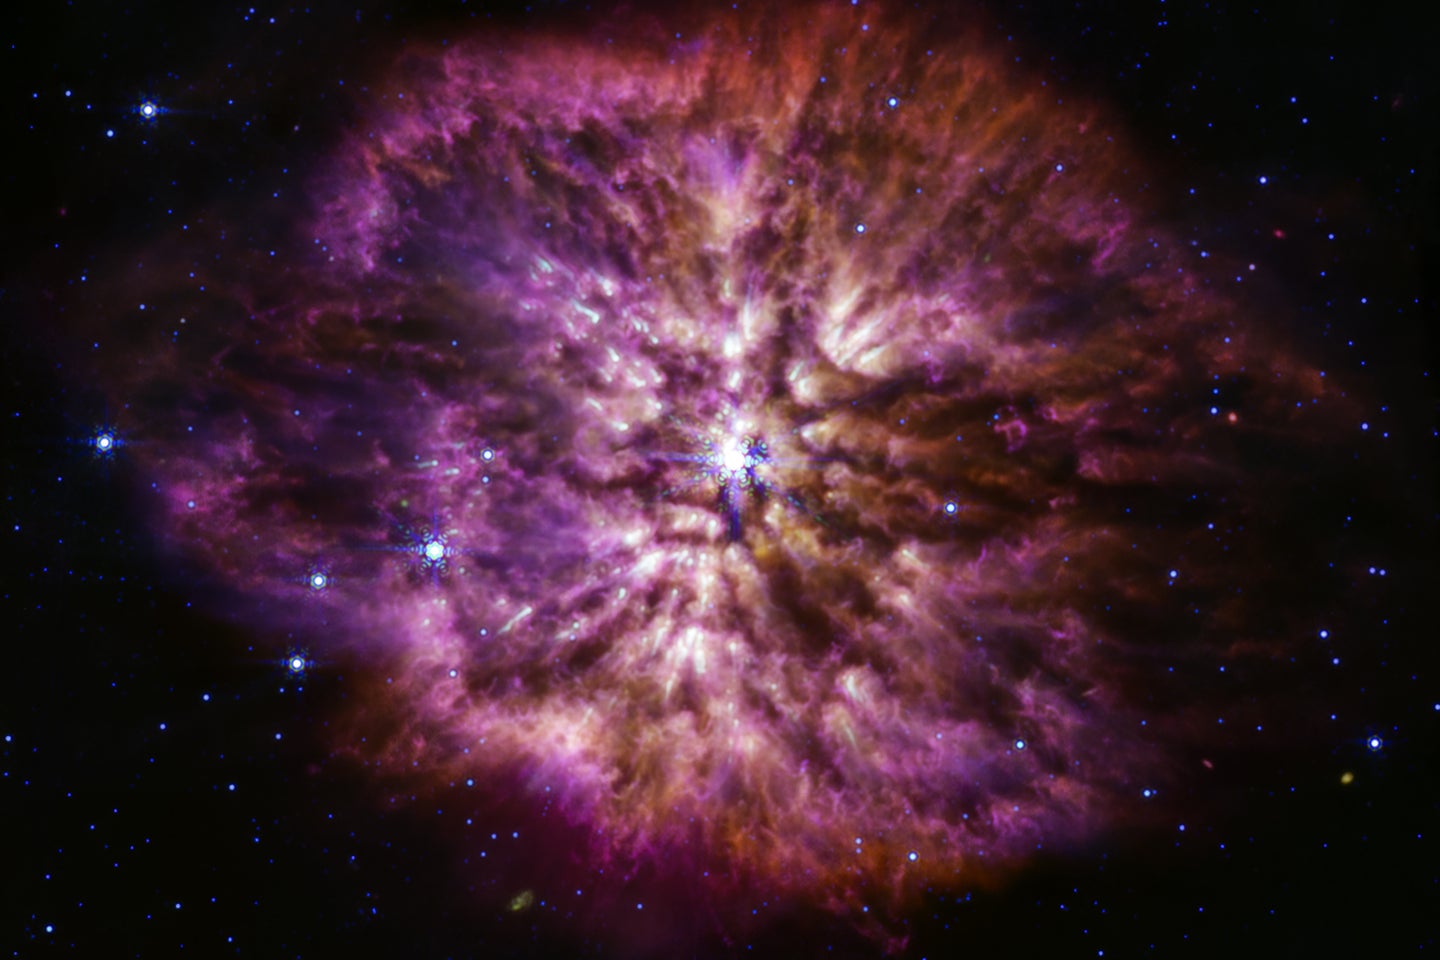 An MIRI image from the James Webb Space Telescope shows a supernova star.